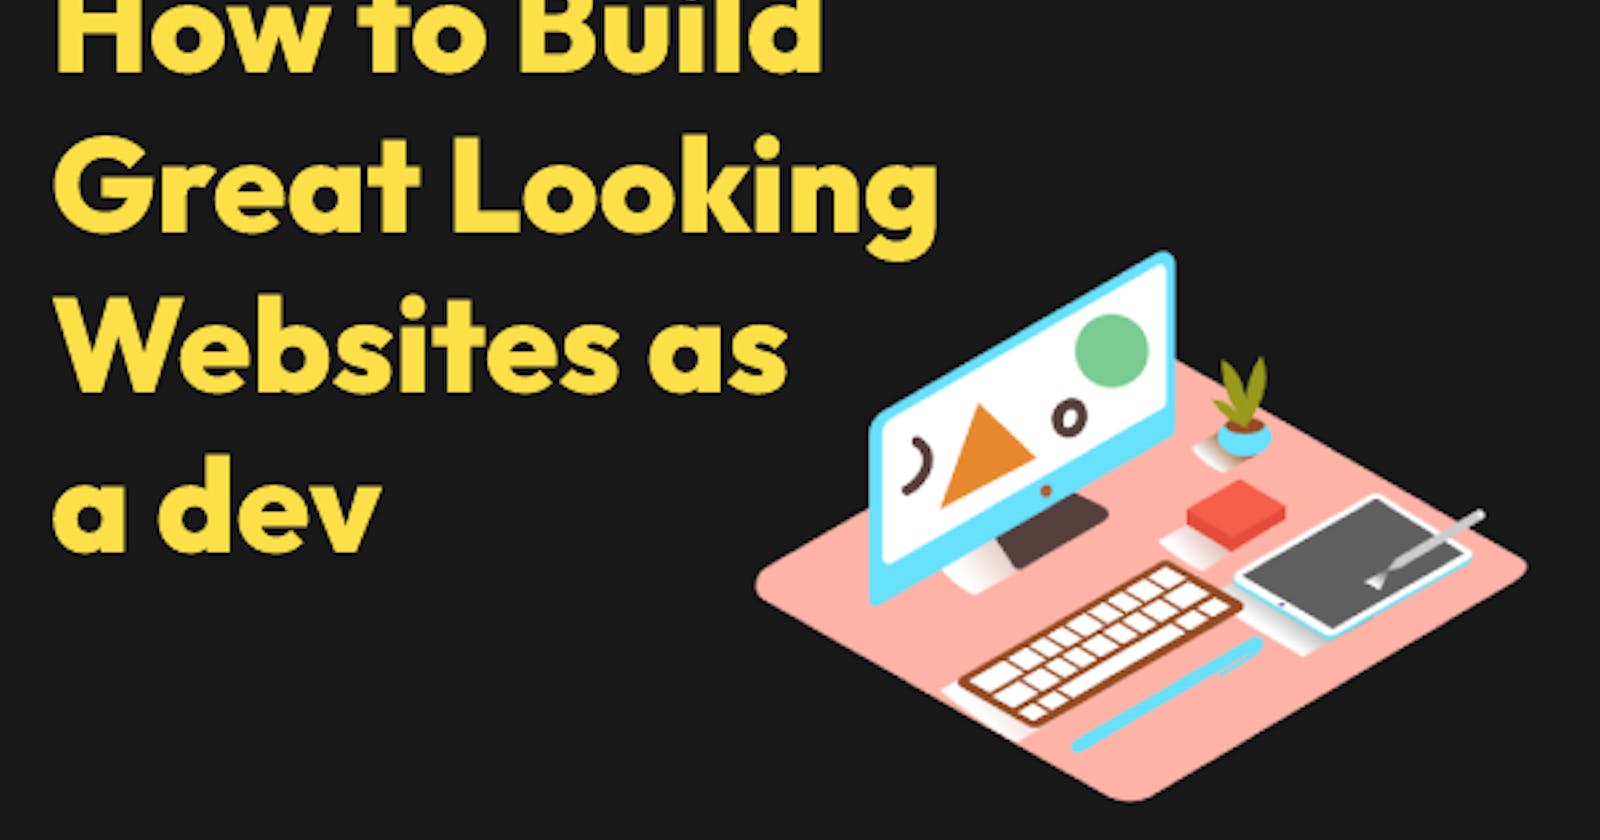 You can create a great looking website while sucking at design